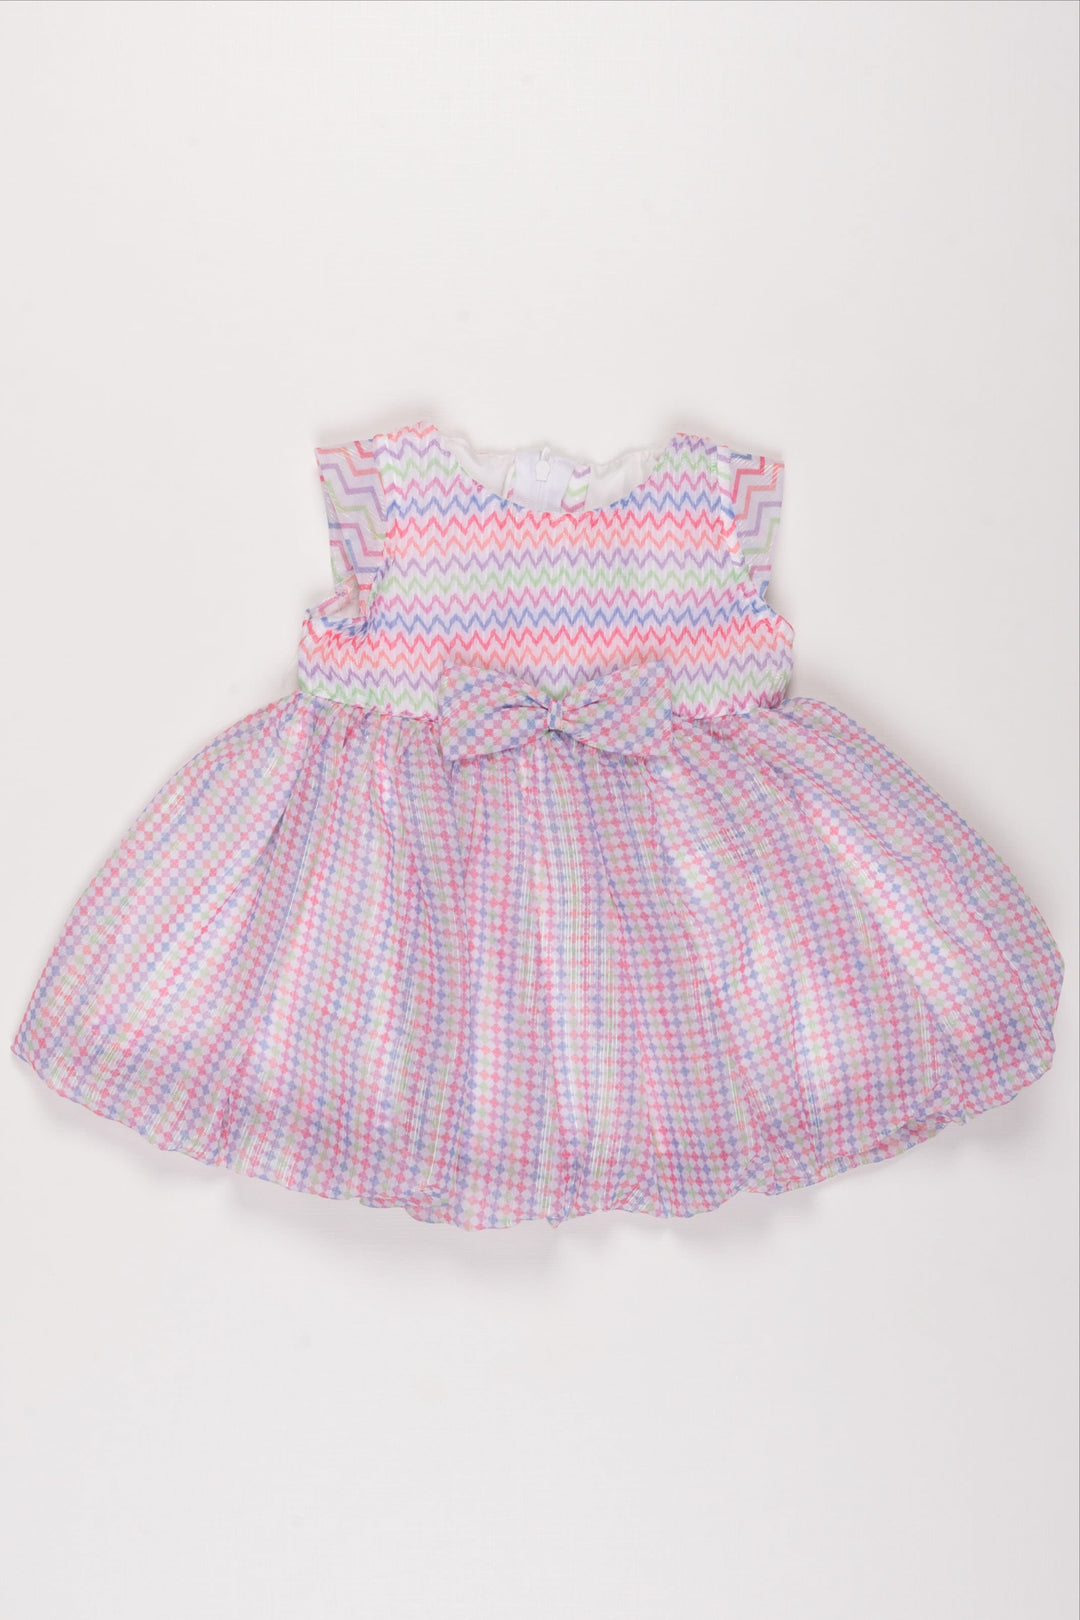 The Nesavu Baby Fancy Frock Infant Girl's Colorful Chevron and Gingham Frock with Bow Detail Nesavu 12 (3M) / multicolor / Georgette BFJ505B-12 Colorful Chevron & Gingham Frock for Infants | Casual Summer Dress | The Nesavu